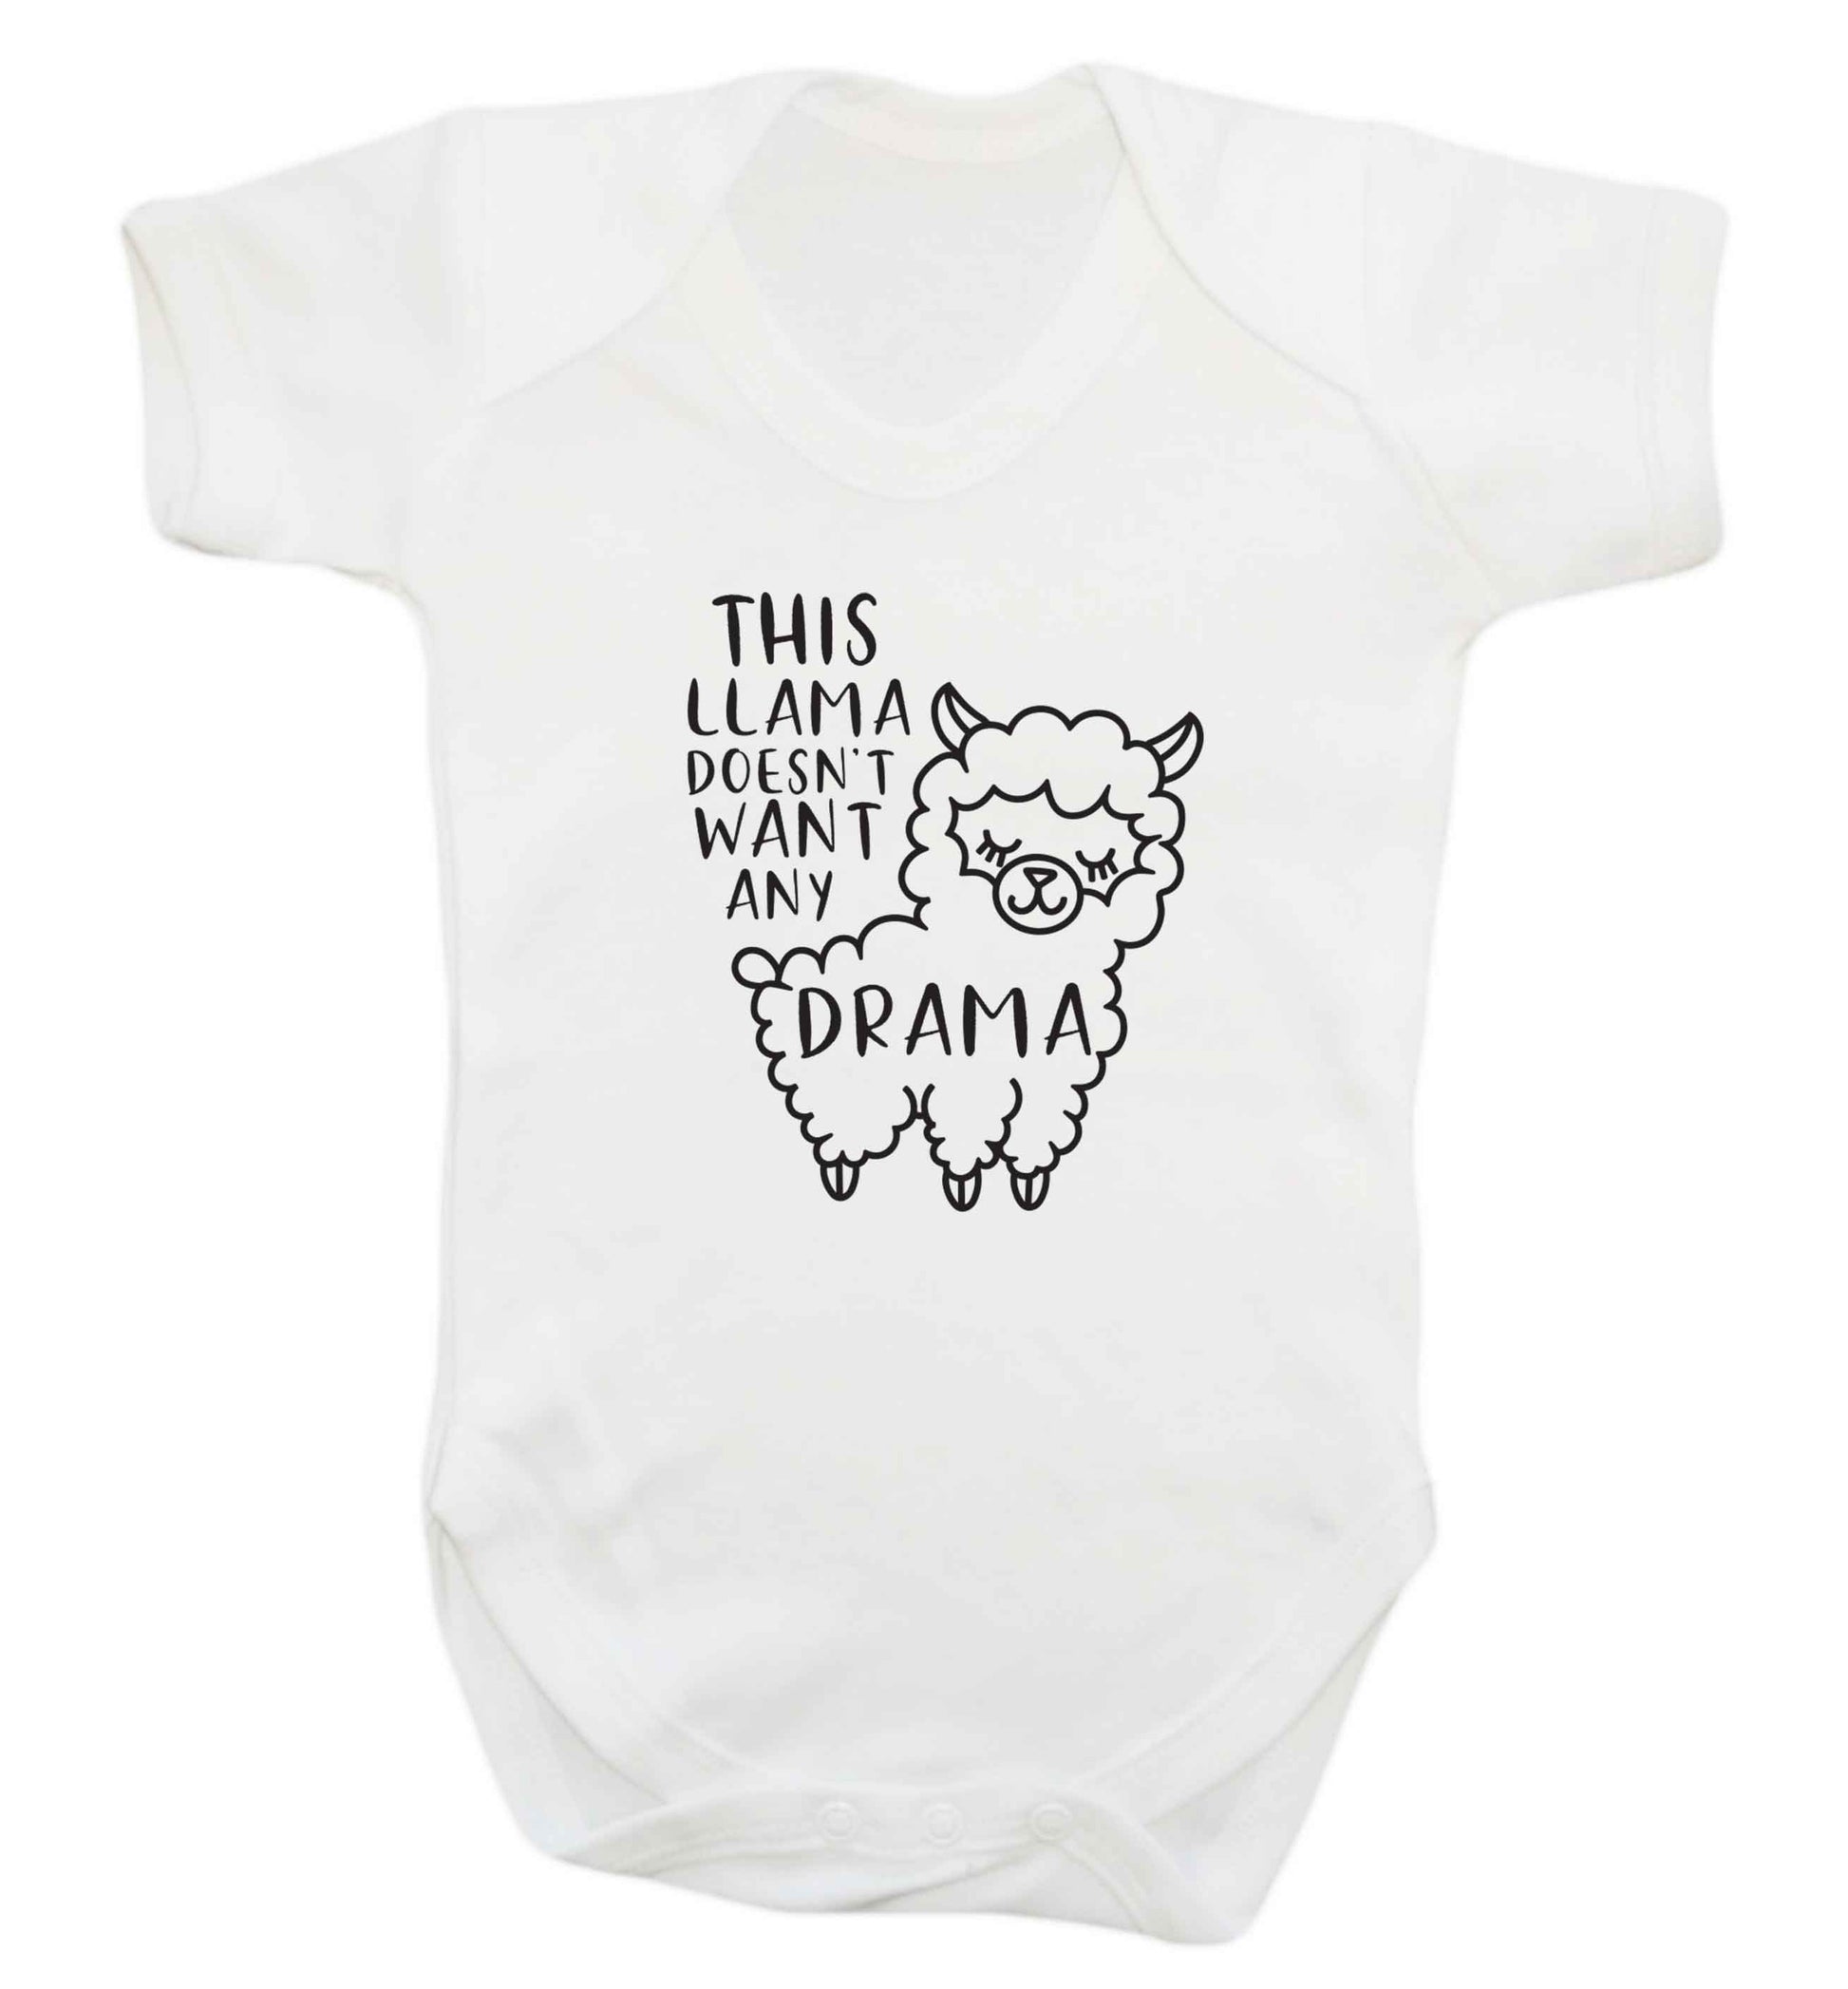 This Llama doesn't want any drama baby vest white 18-24 months